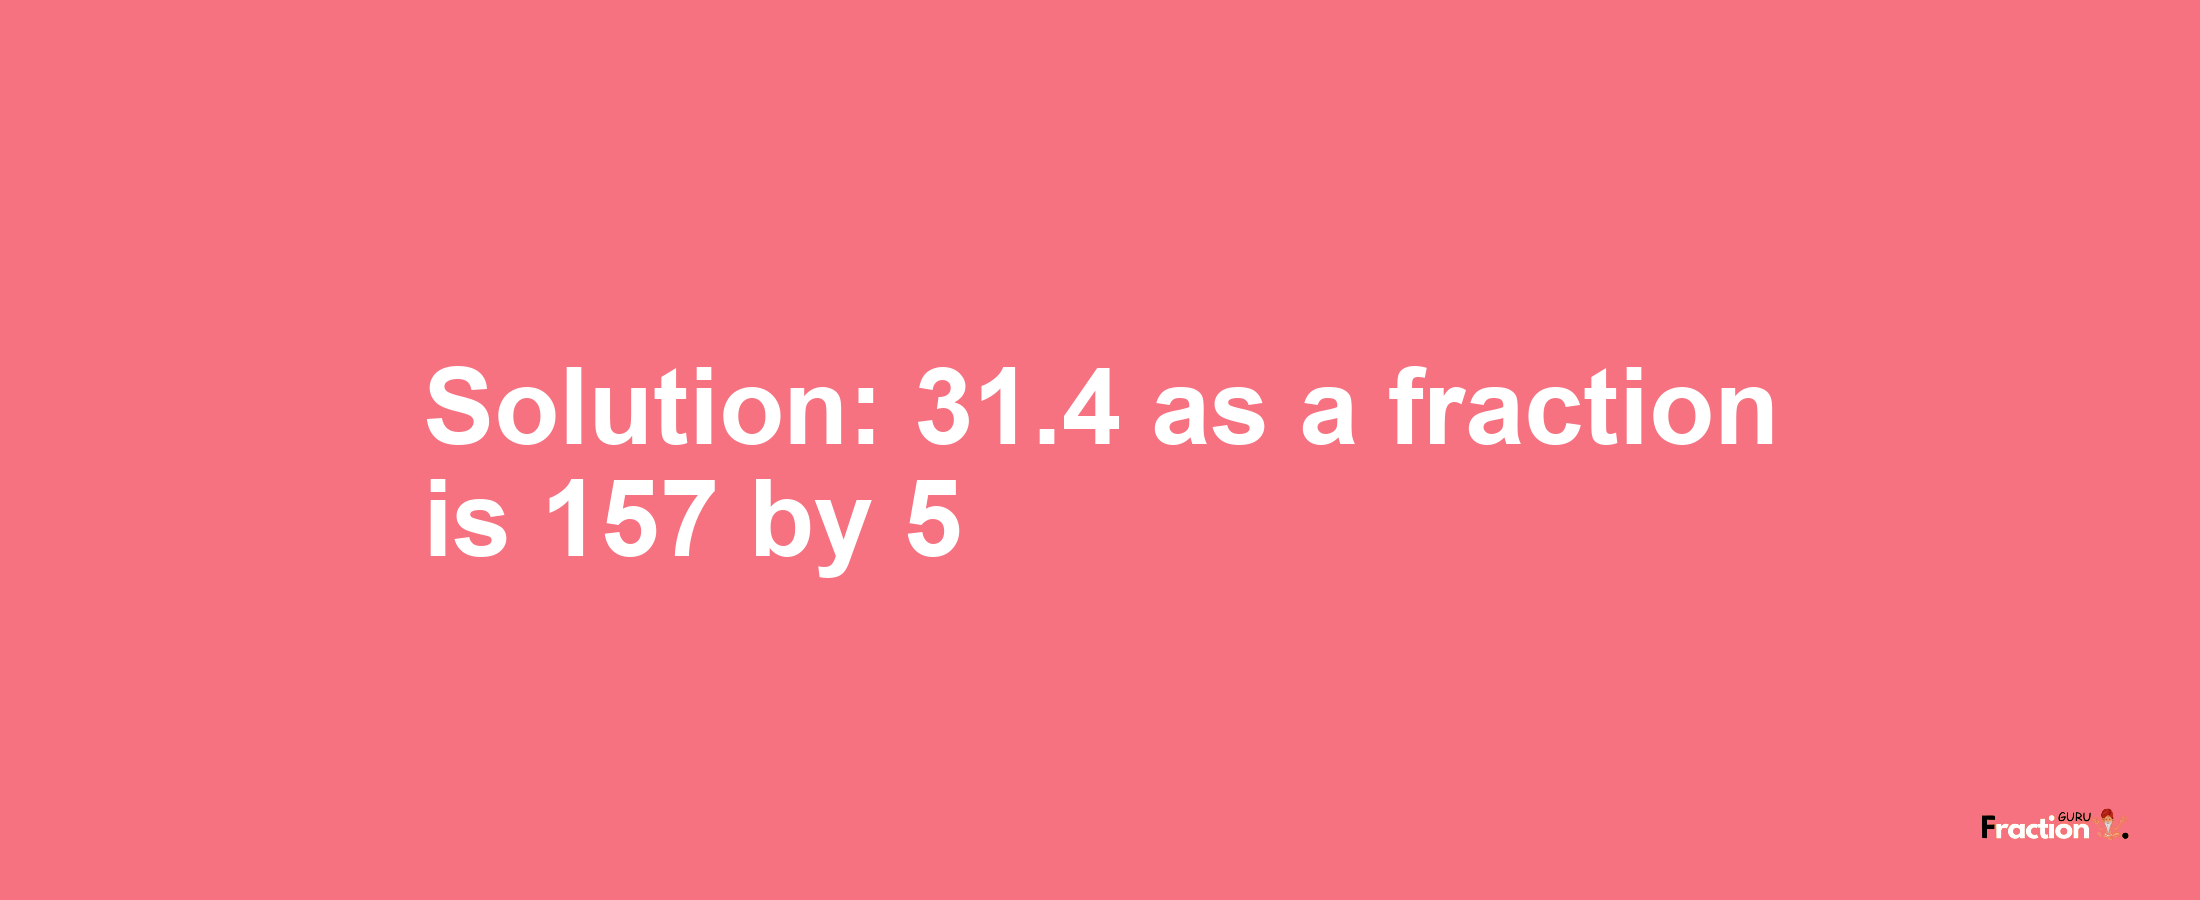 Solution:31.4 as a fraction is 157/5